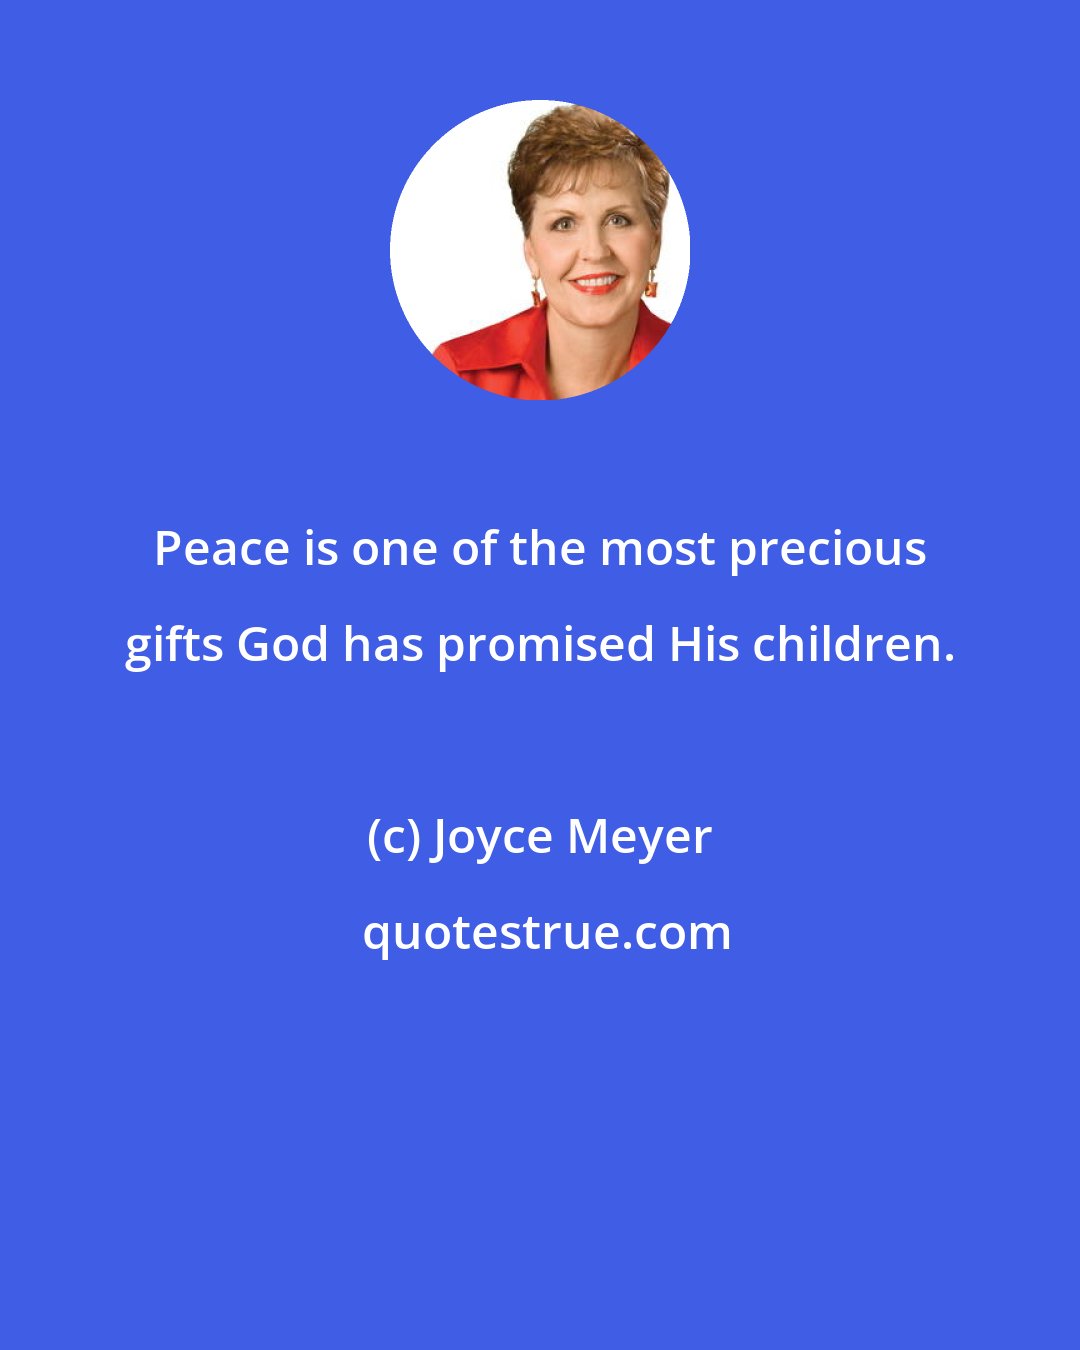 Joyce Meyer: Peace is one of the most precious gifts God has promised His children.